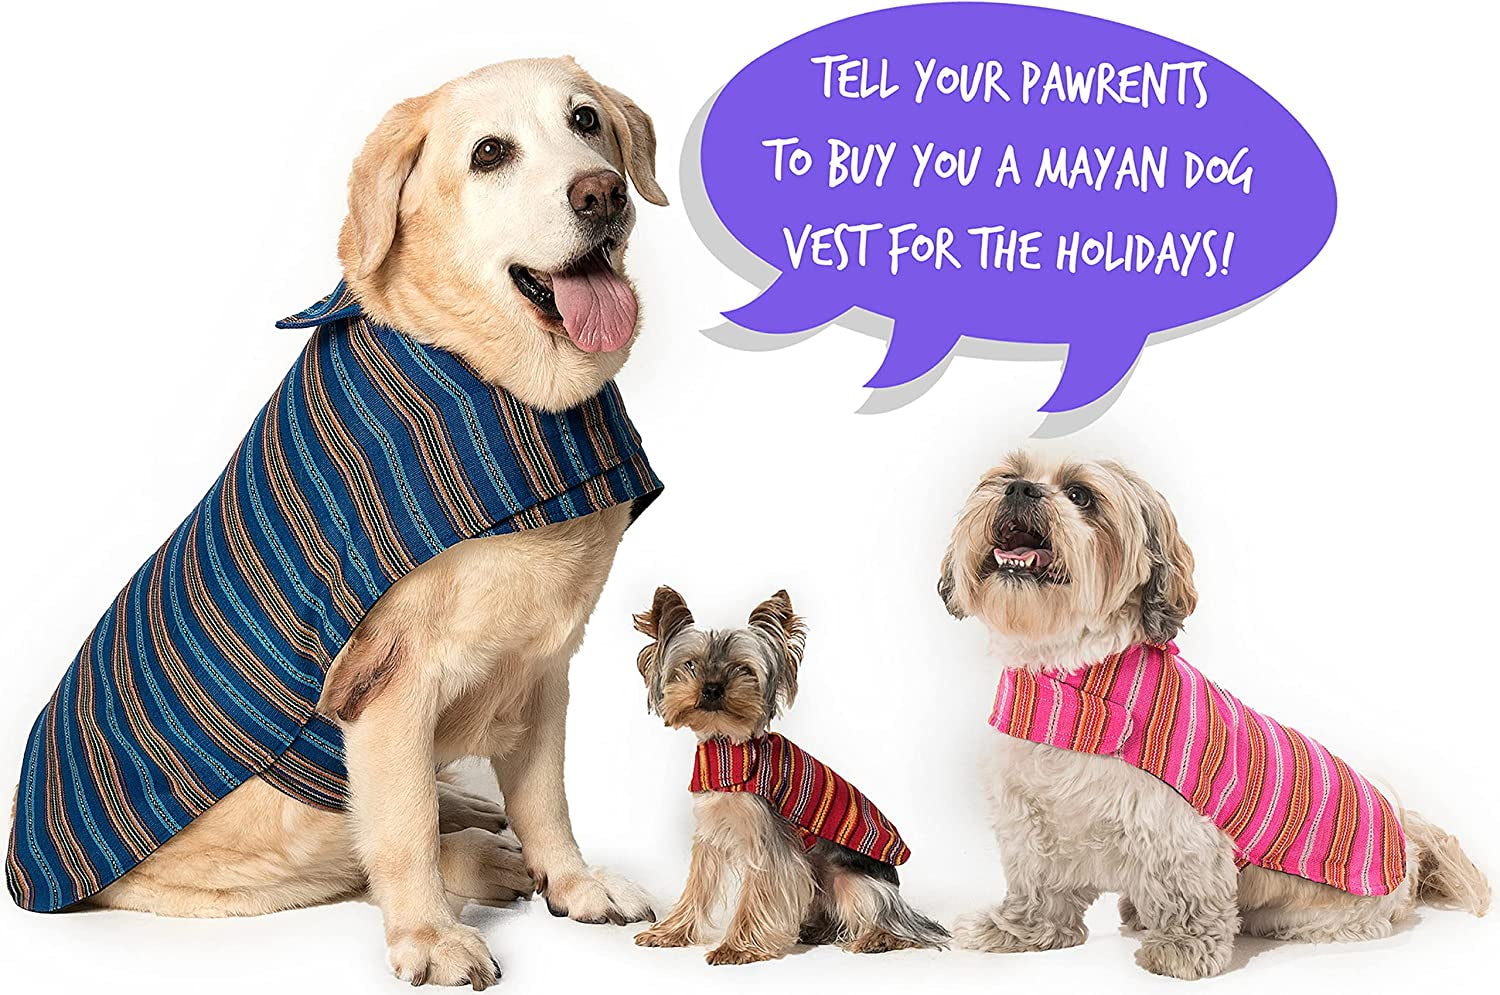 Mayan Dog Clothing for Dogs. Works As, Coat, Sweater, Vest, Jacket, Stress Reliever. for XXS, Small, Medium, Large, XL, XXL Dogs (Any Size) Animals & Pet Supplies > Pet Supplies > Dog Supplies > Dog Apparel Mayan Dog   